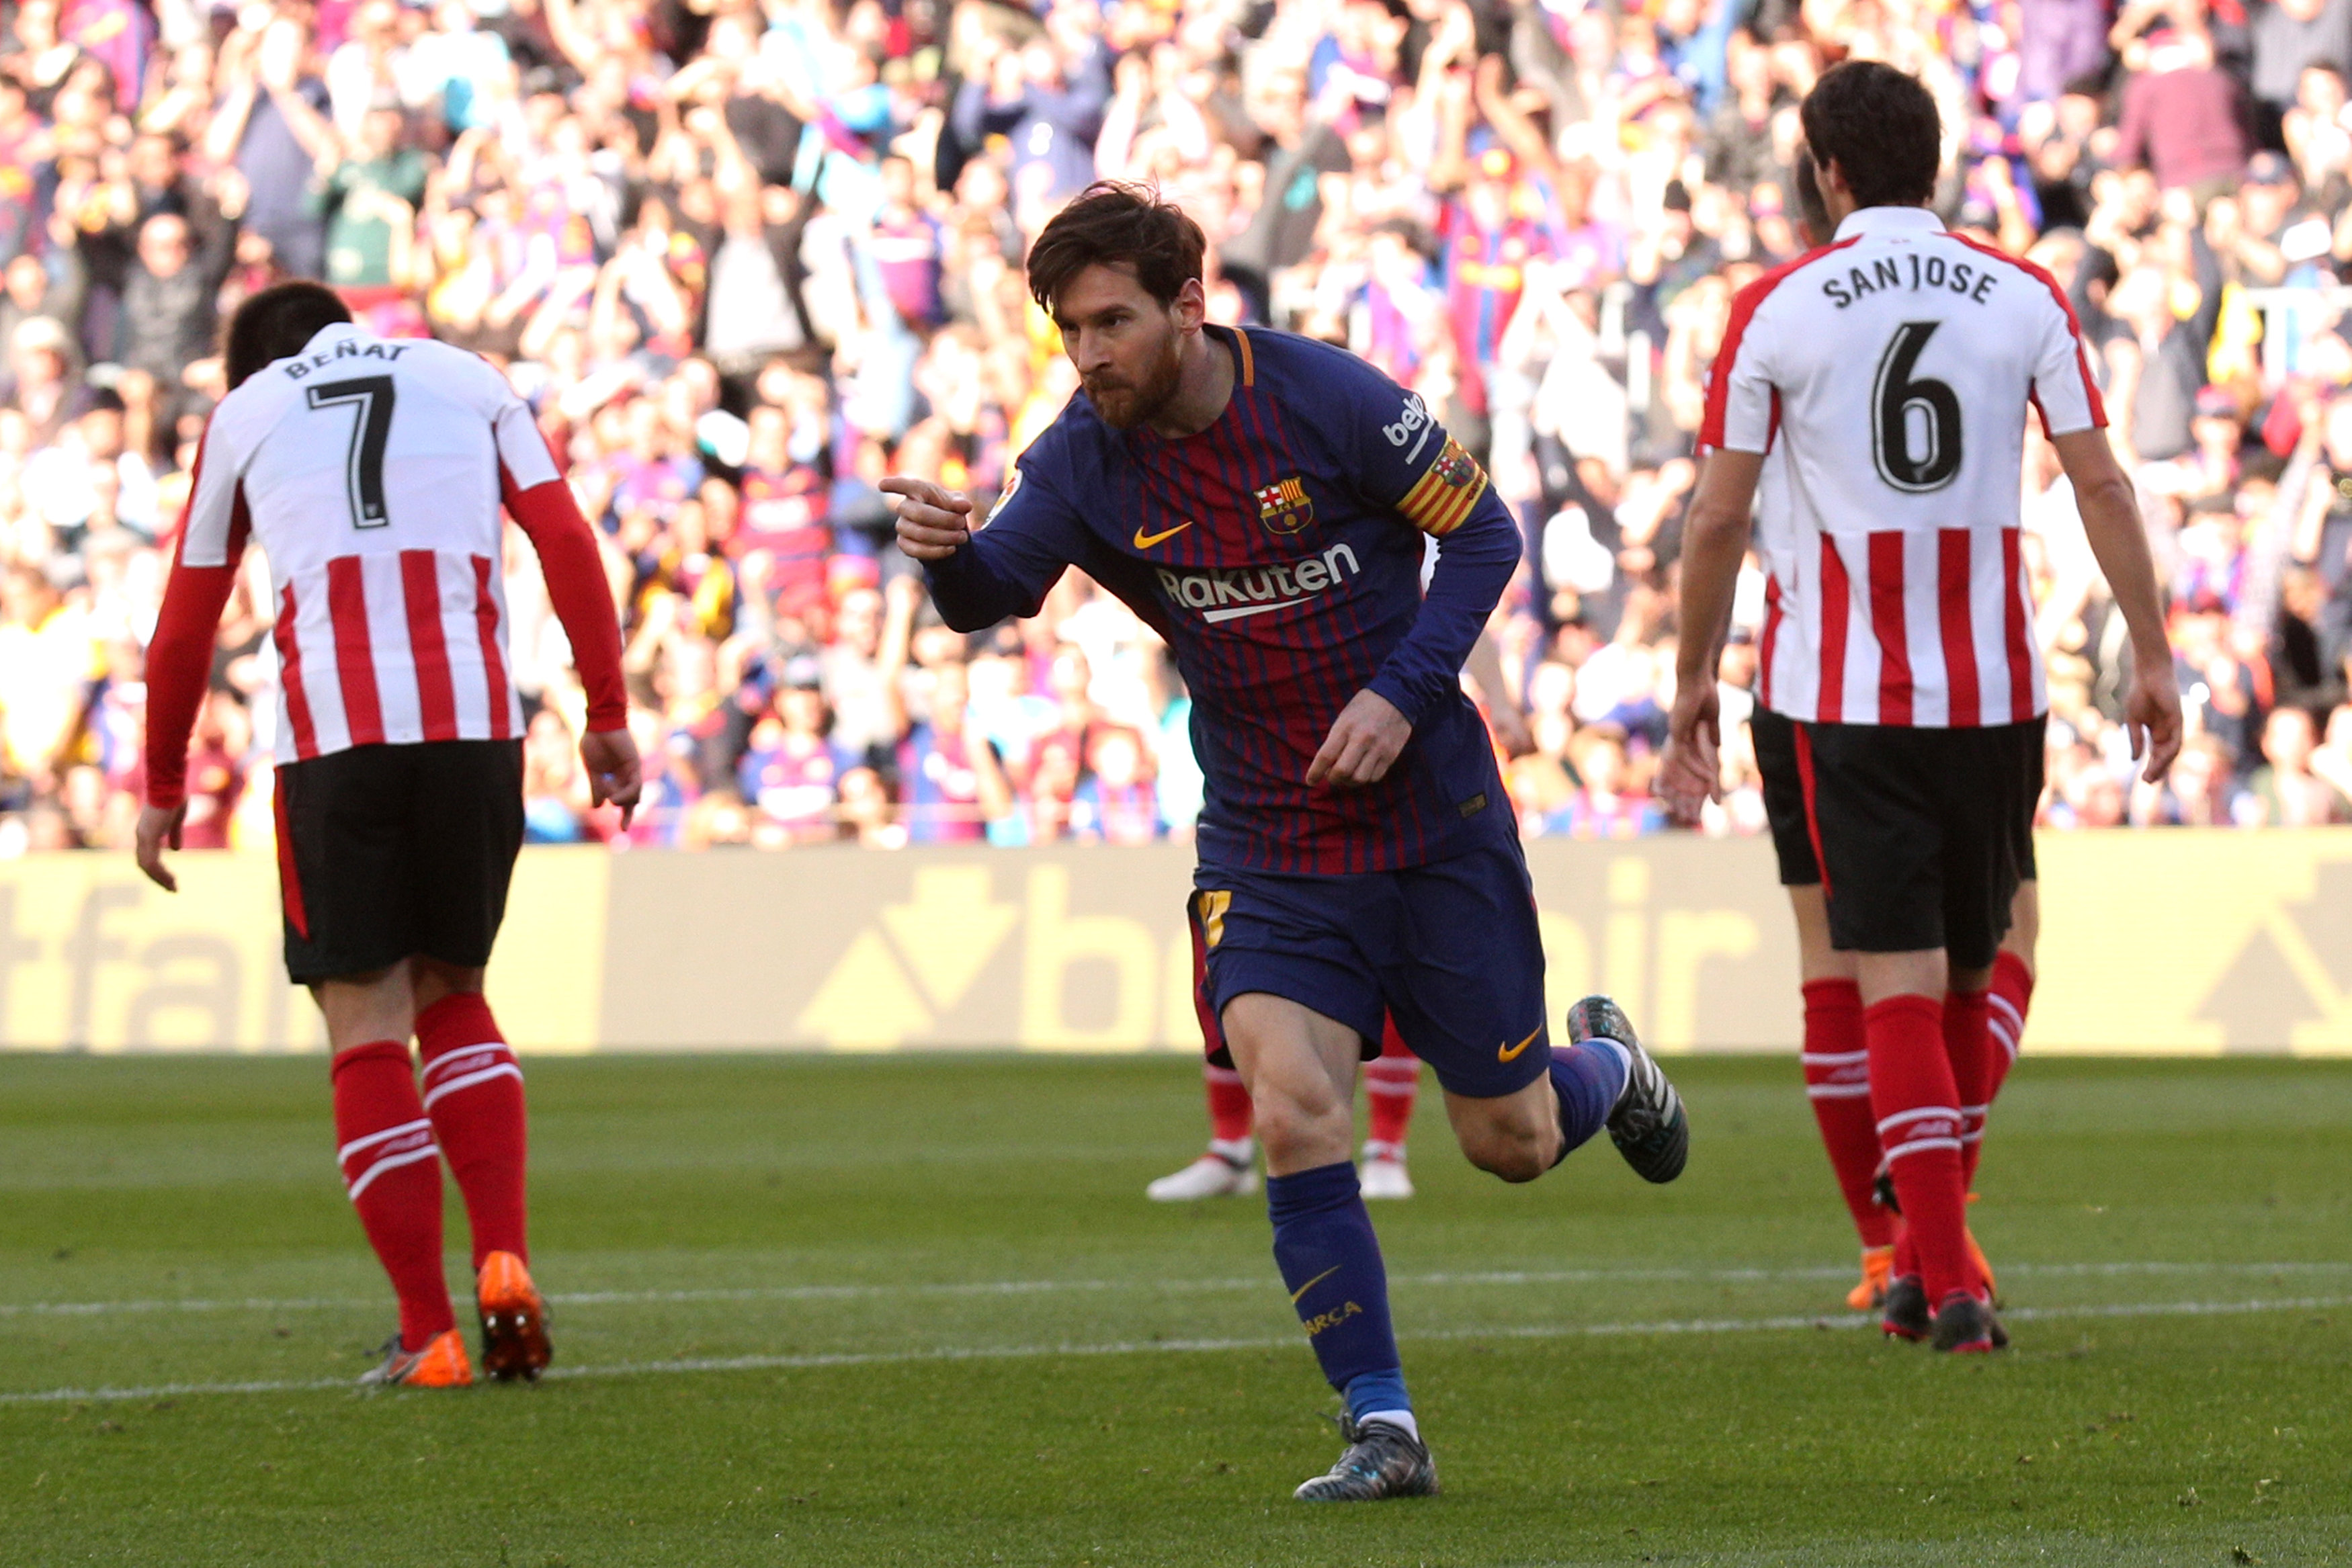 Football: Messi on target again as Barca blank Athletic